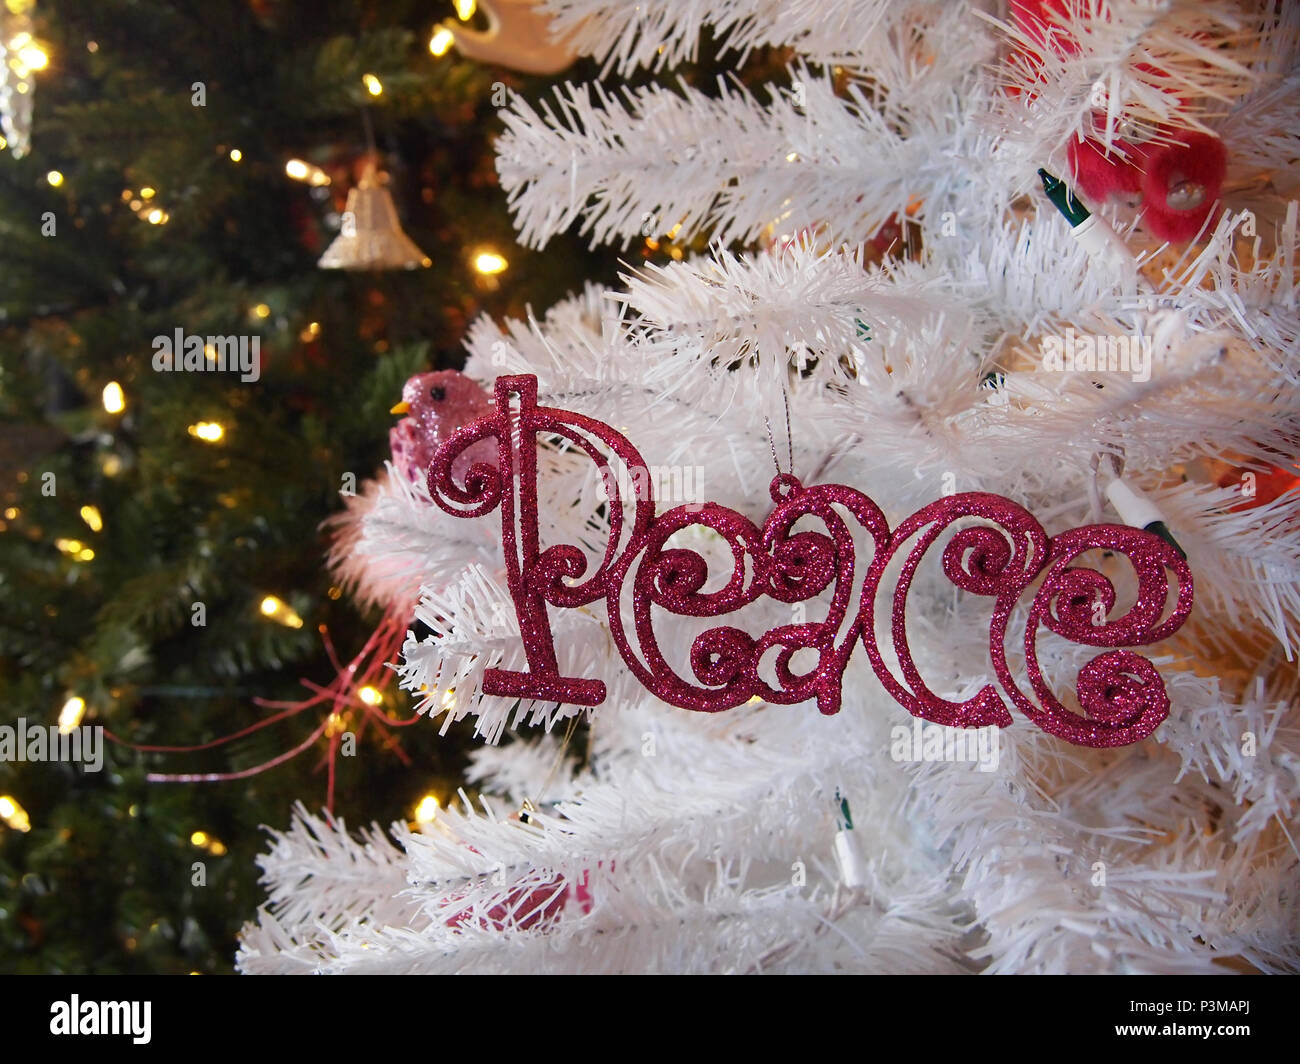 The word PEACE spelled out in pink glittered lettering is an ornament hanging on a white Christmas tree with glowing lighted evergreens in the backgro Stock Photo